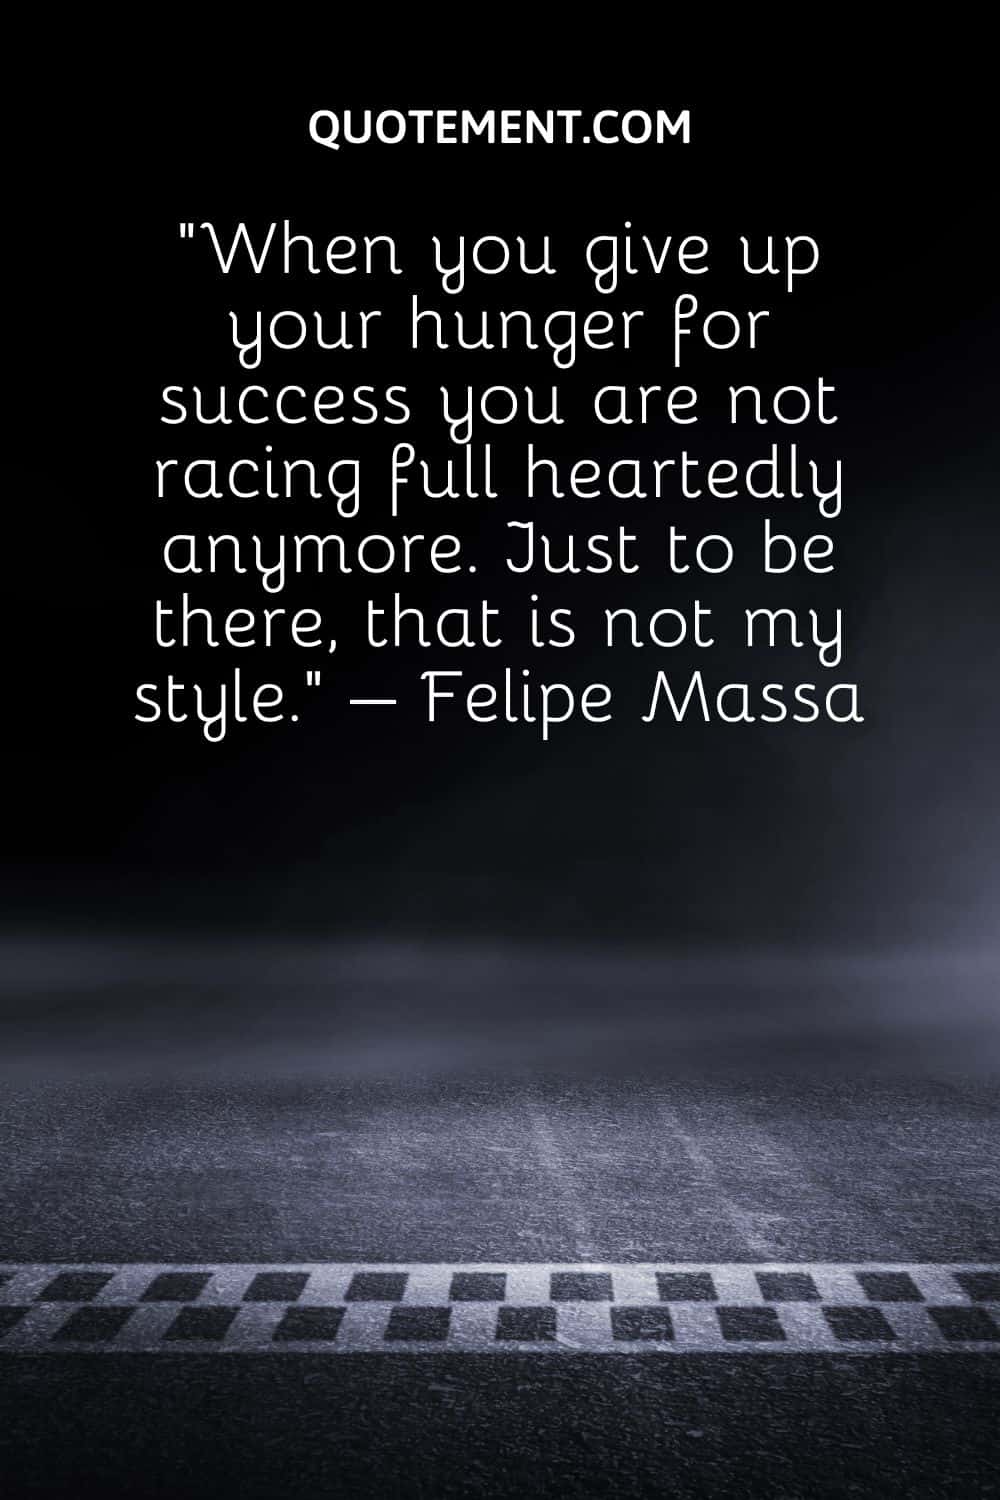 When you give up your hunger for success you are not racing full heartedly anymore